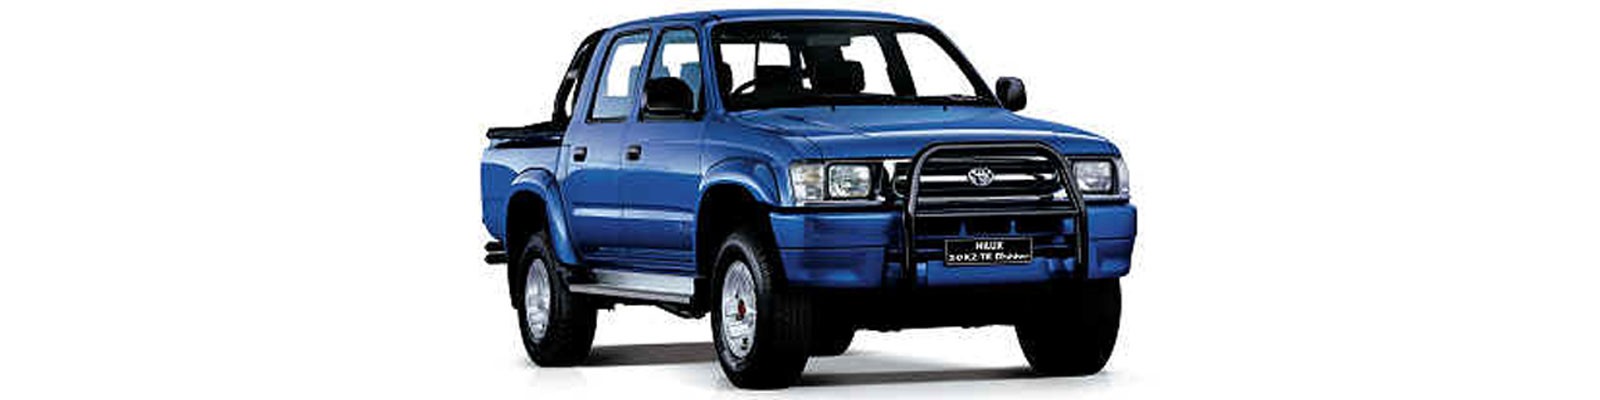 Accessories for Toyota Hilux Single Cab 1998-2001